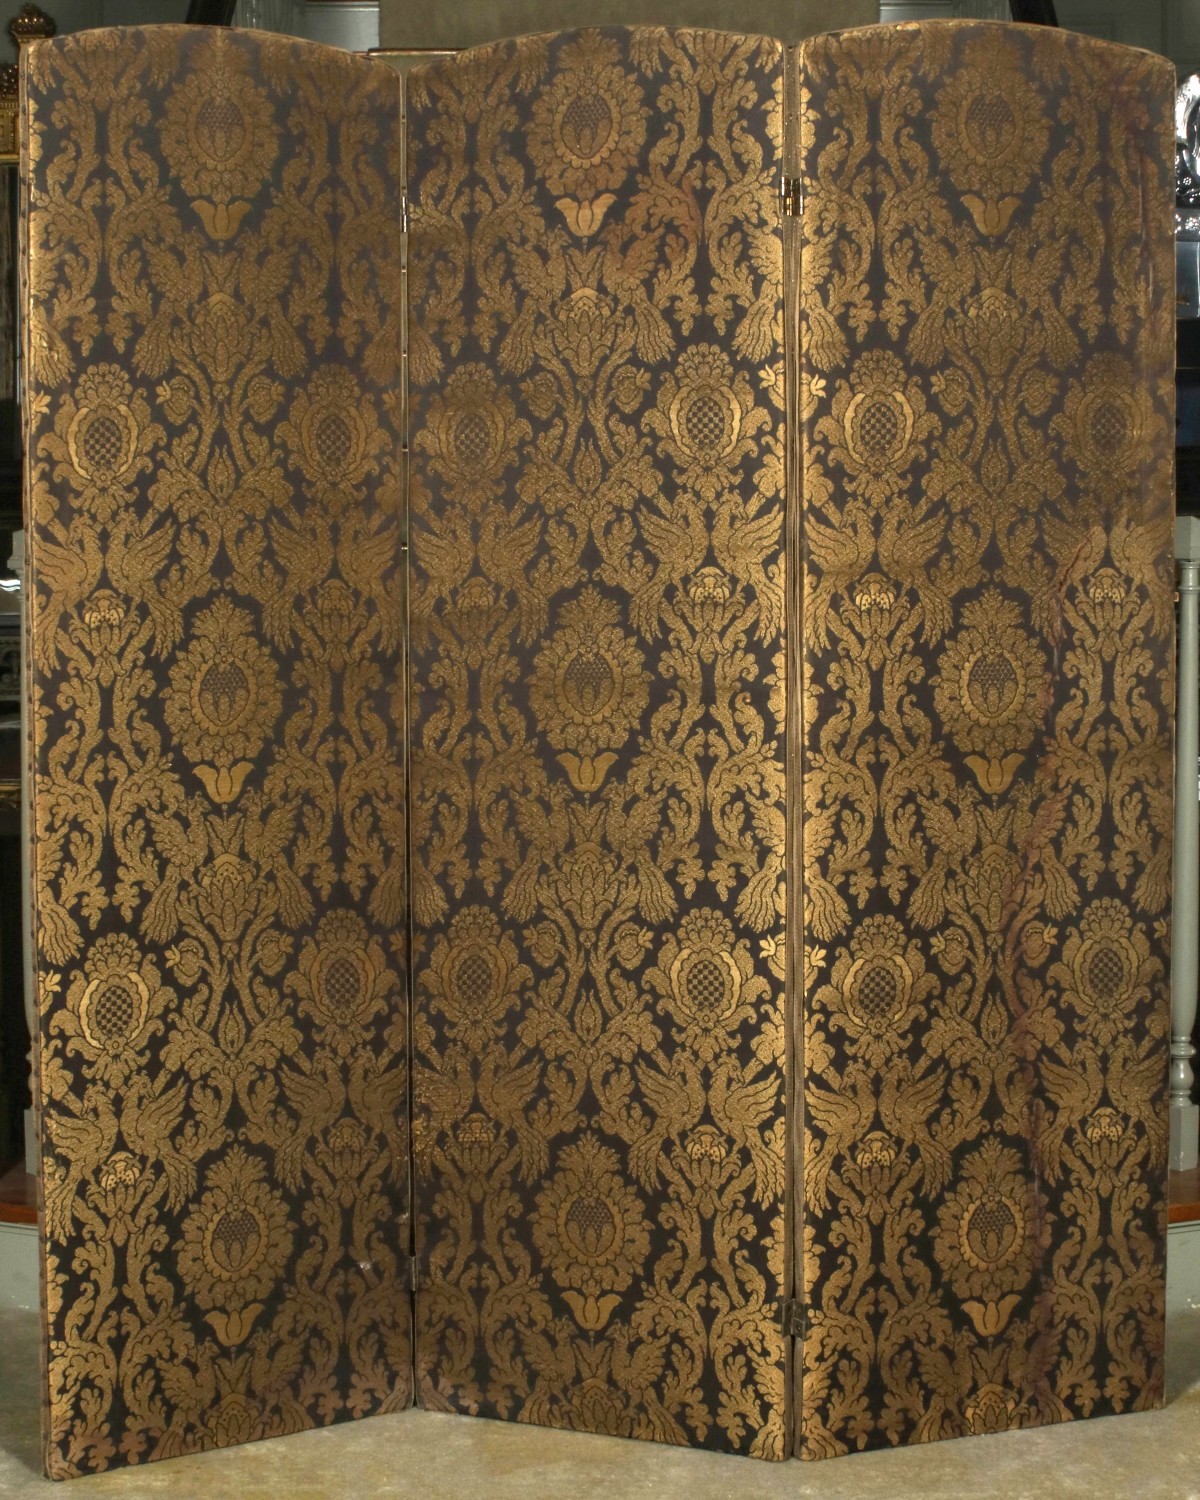 A THREE FOLD DAMASK COVERED FLOOR SCREEN